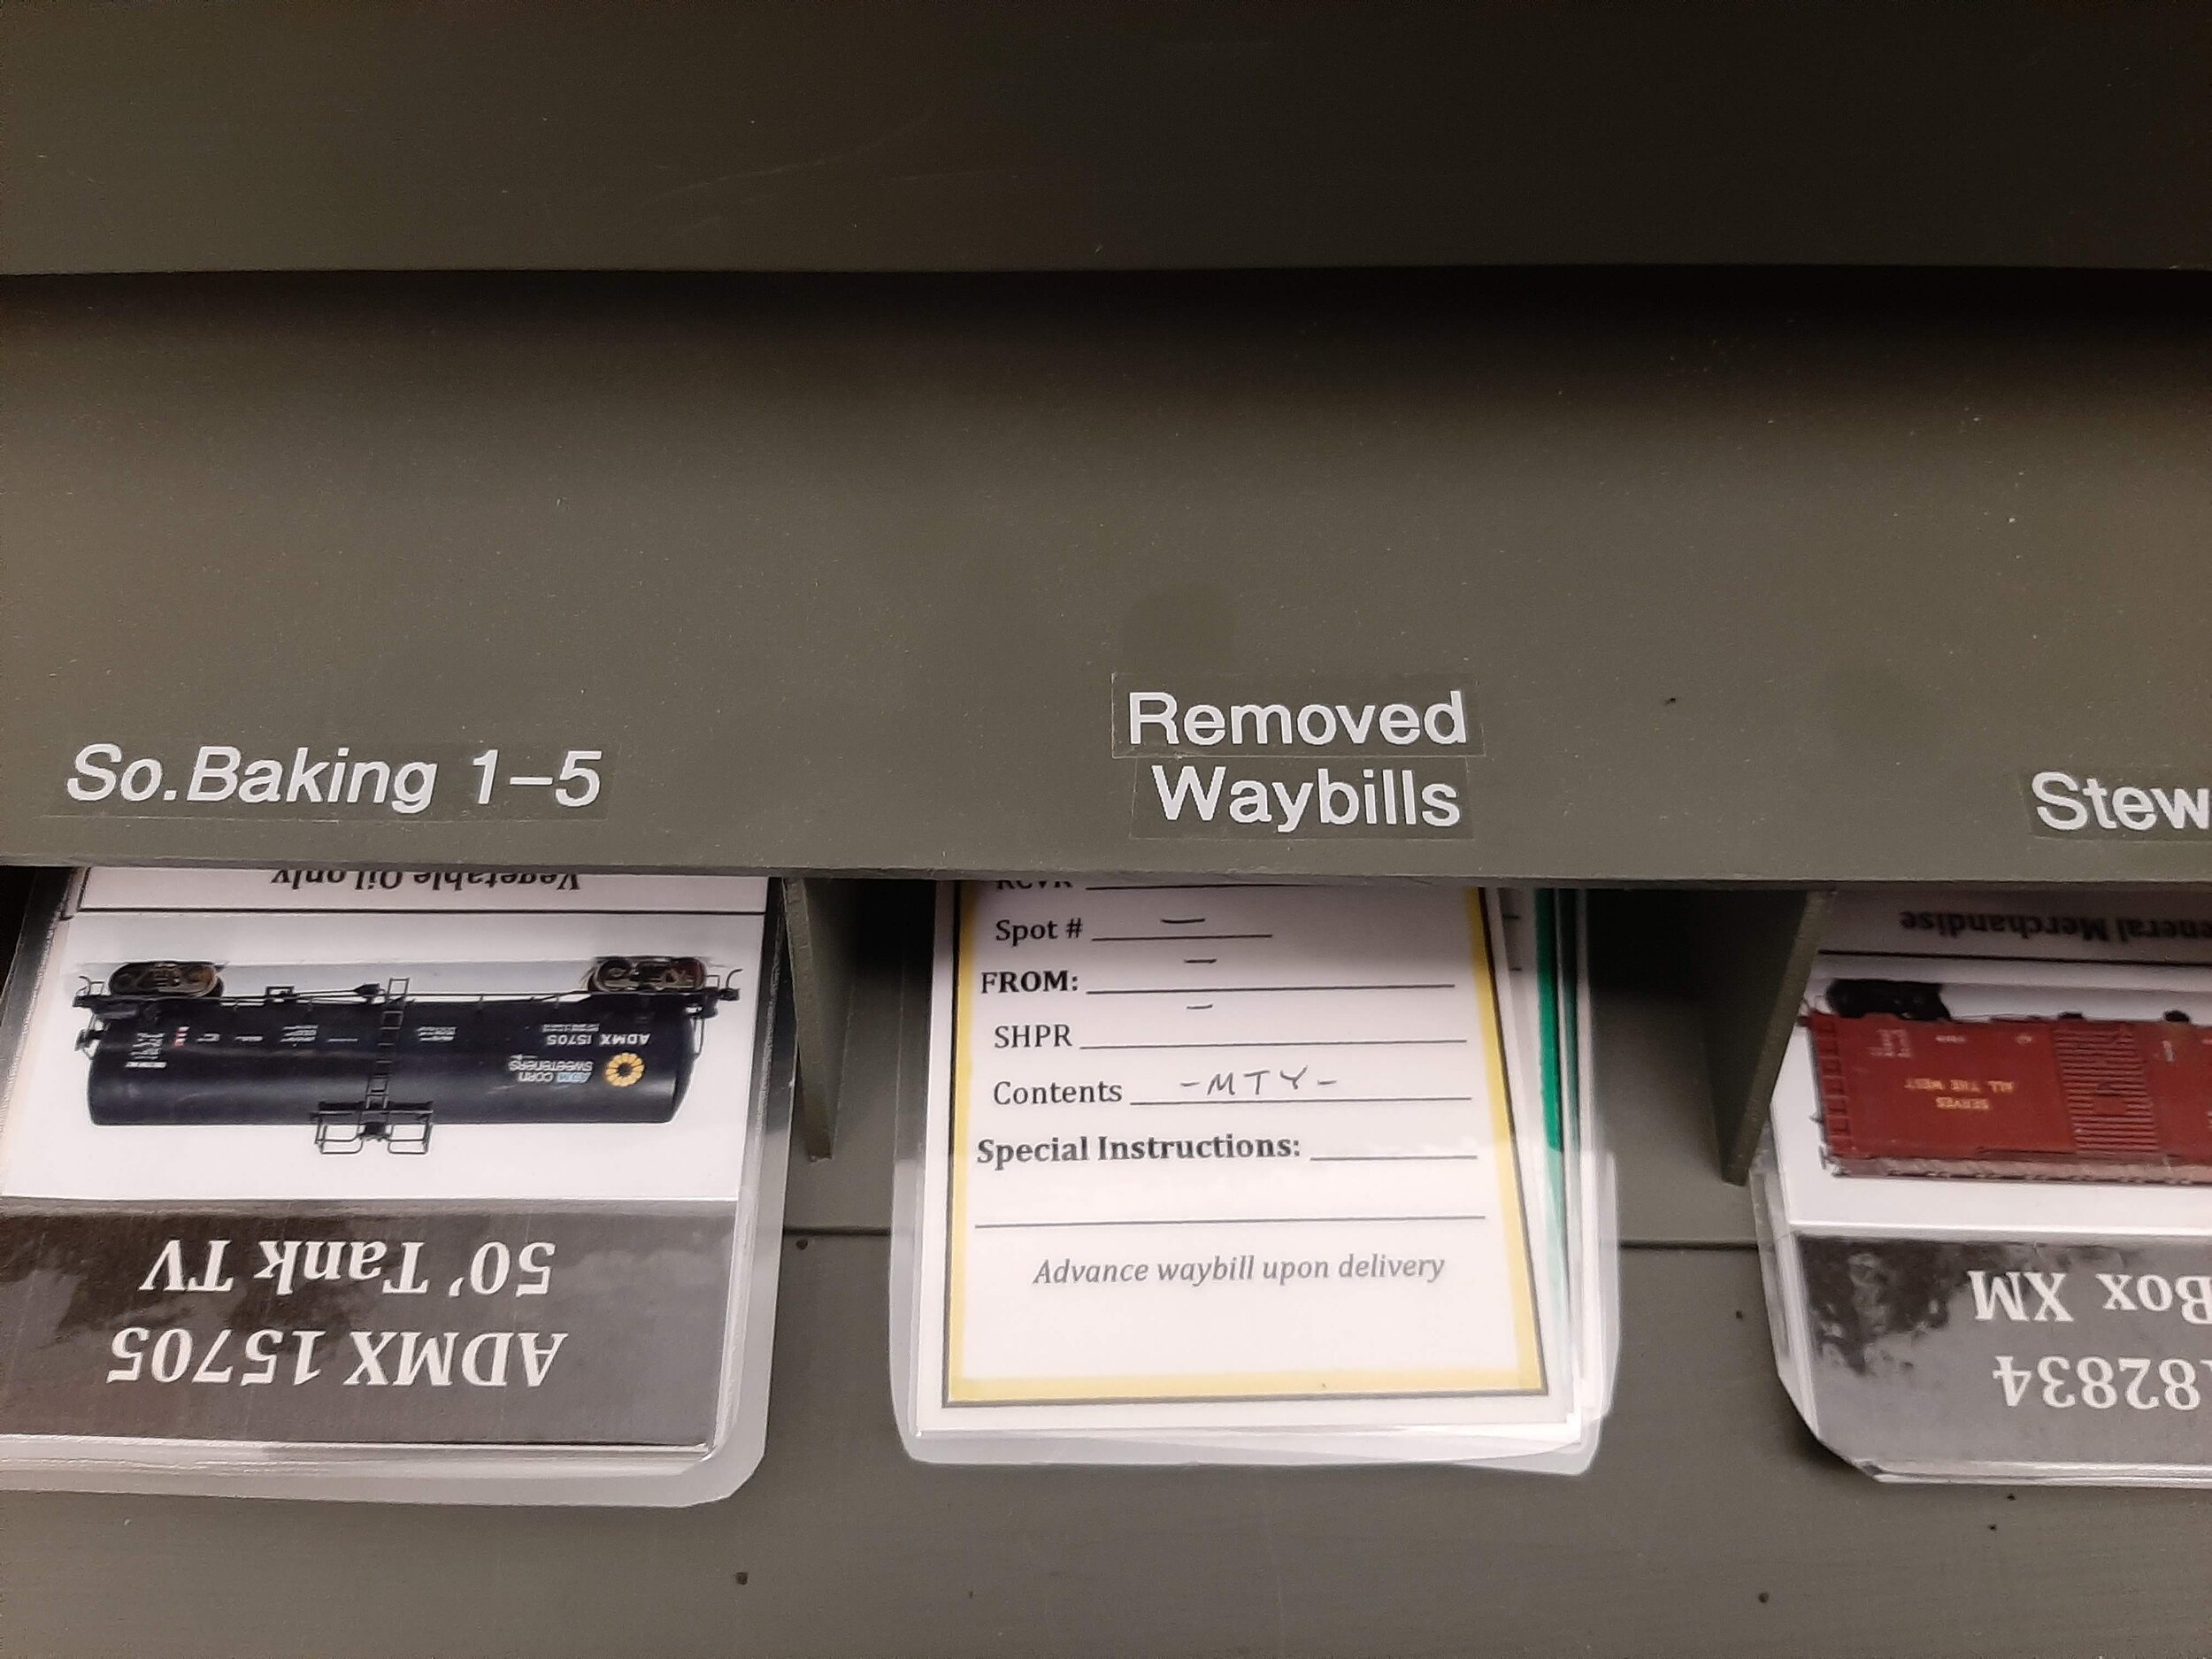  When cars are set out, the waybill goes into the industry card file. A separate “Removed Waybills” file is also near each switching location.   